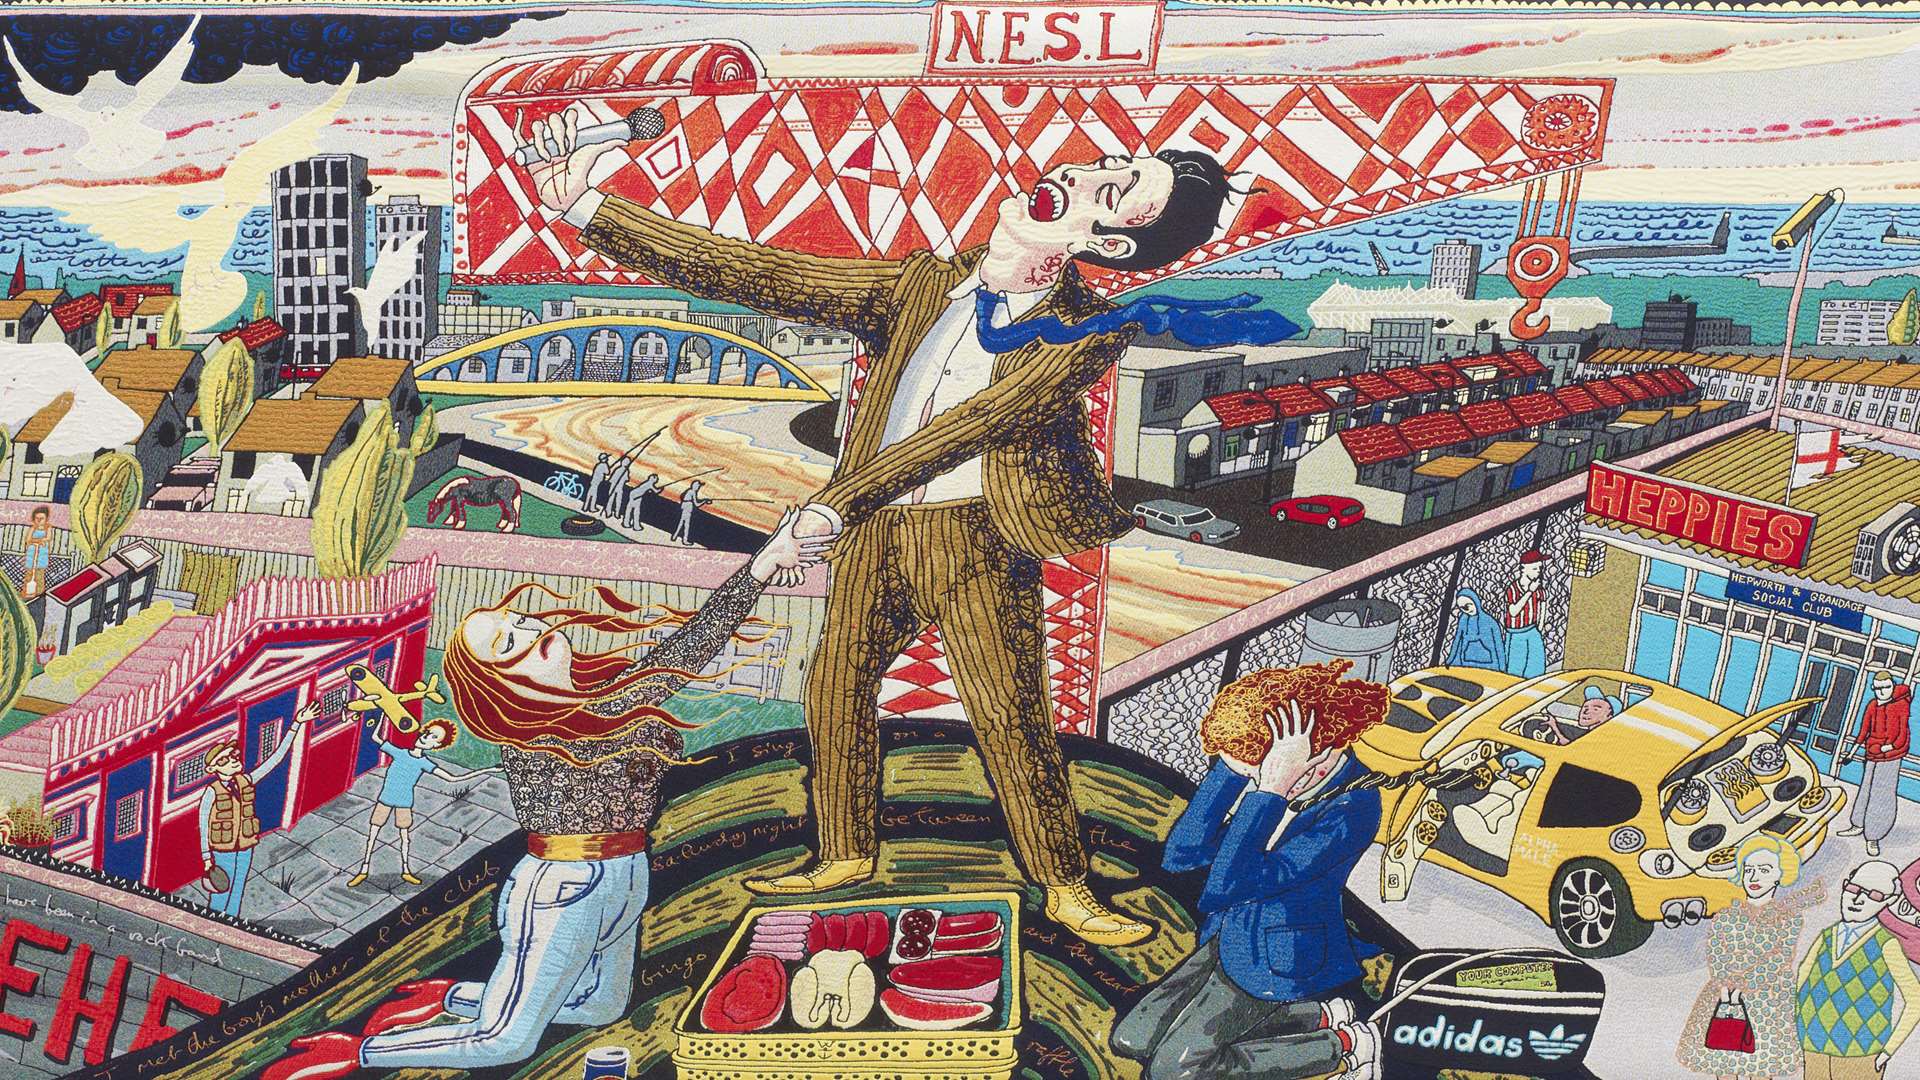 The Agony in the Car Park part of Grayson Perry's the Vanity of Small Differences exhibition